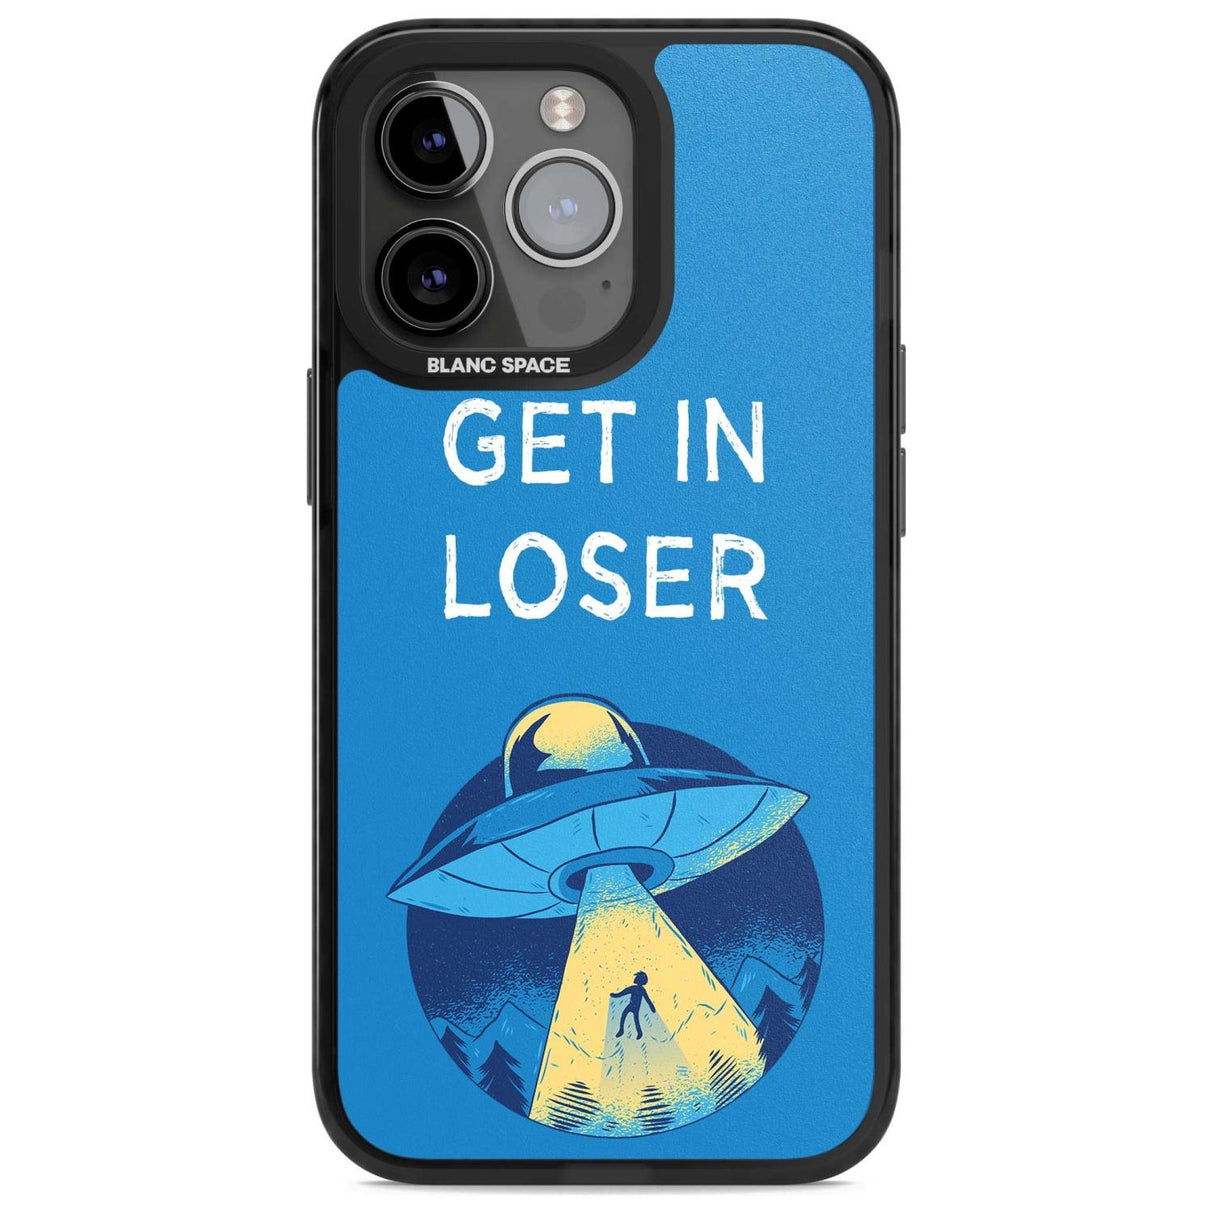 Get in Loser UFO Phone Case iPhone 15 Pro / Magsafe Black Impact Case,iPhone 15 Pro Max / Magsafe Black Impact Case,iPhone 14 Pro Max / Magsafe Black Impact Case,iPhone 13 Pro / Magsafe Black Impact Case,iPhone 14 Pro / Magsafe Black Impact Case Blanc Space